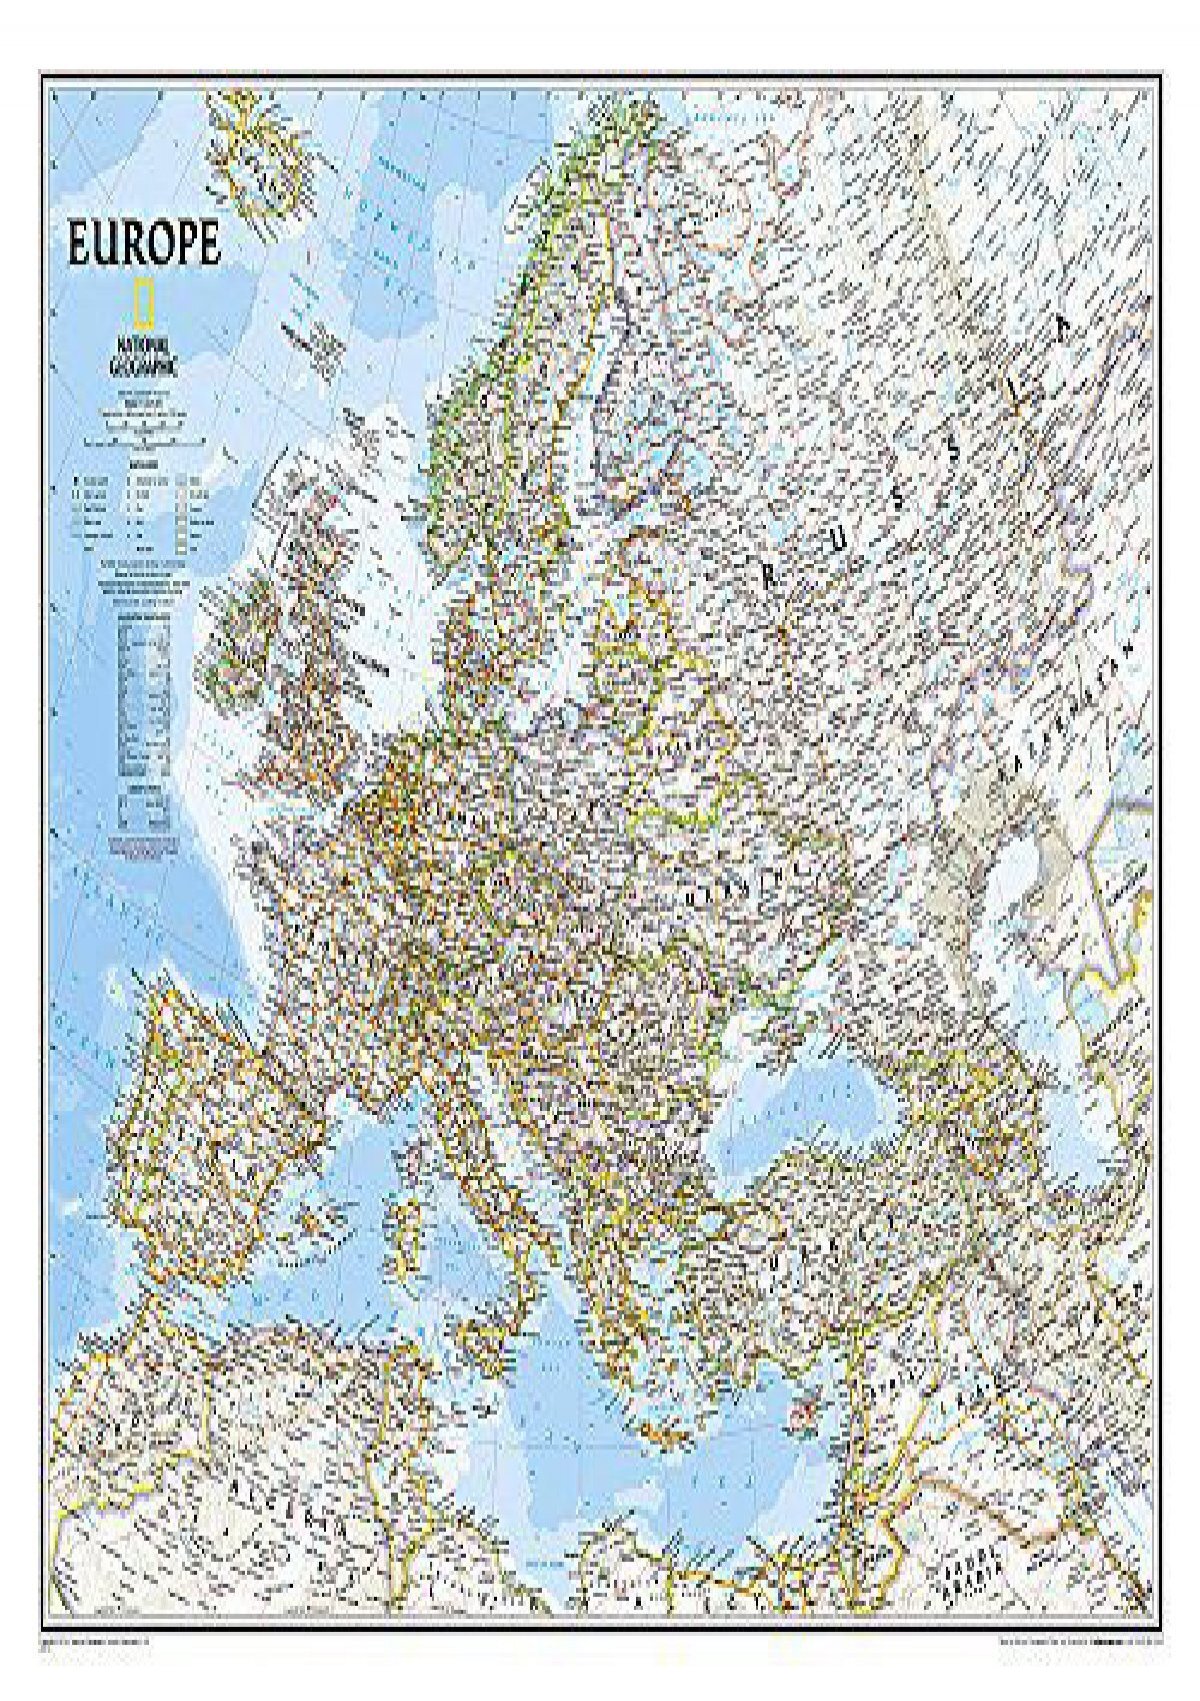 Europe Classic Laminated National Geographic Reference Map